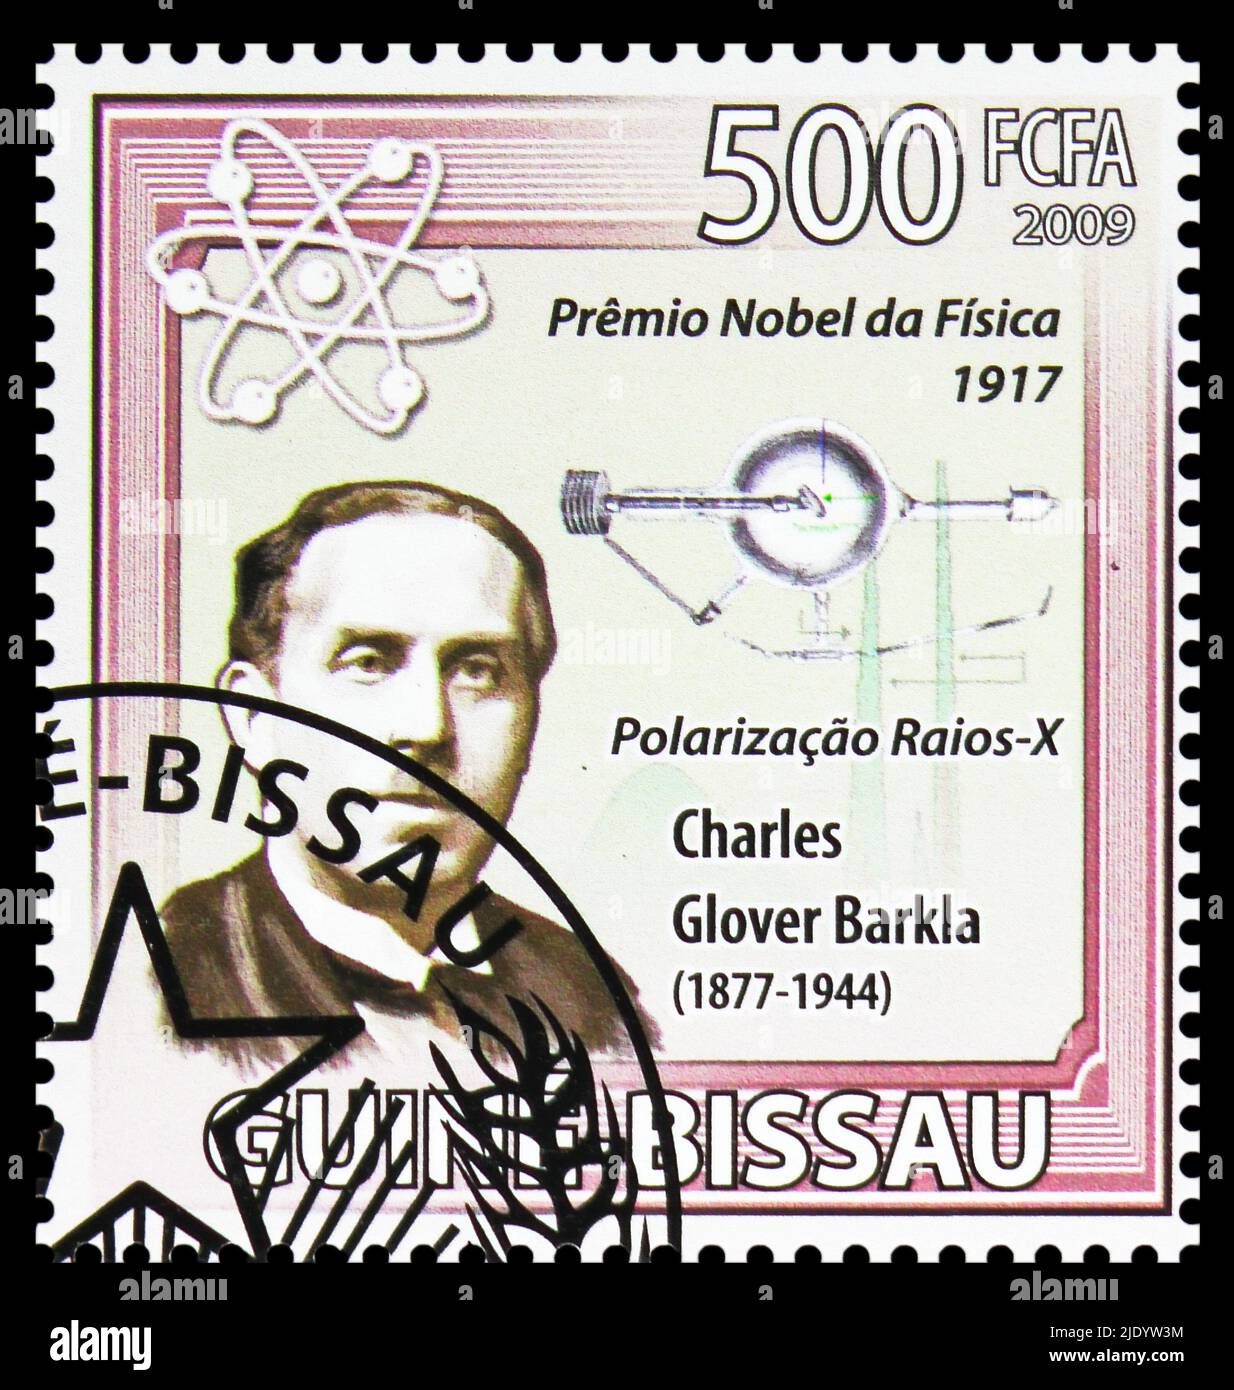 MOSCOW, RUSSIA - JUNE 17, 2022: Postage stamp printed in Guinea-Bissau shows Charles Glover Barkla, Nobel Prize serie, circa 2009 Stock Photo